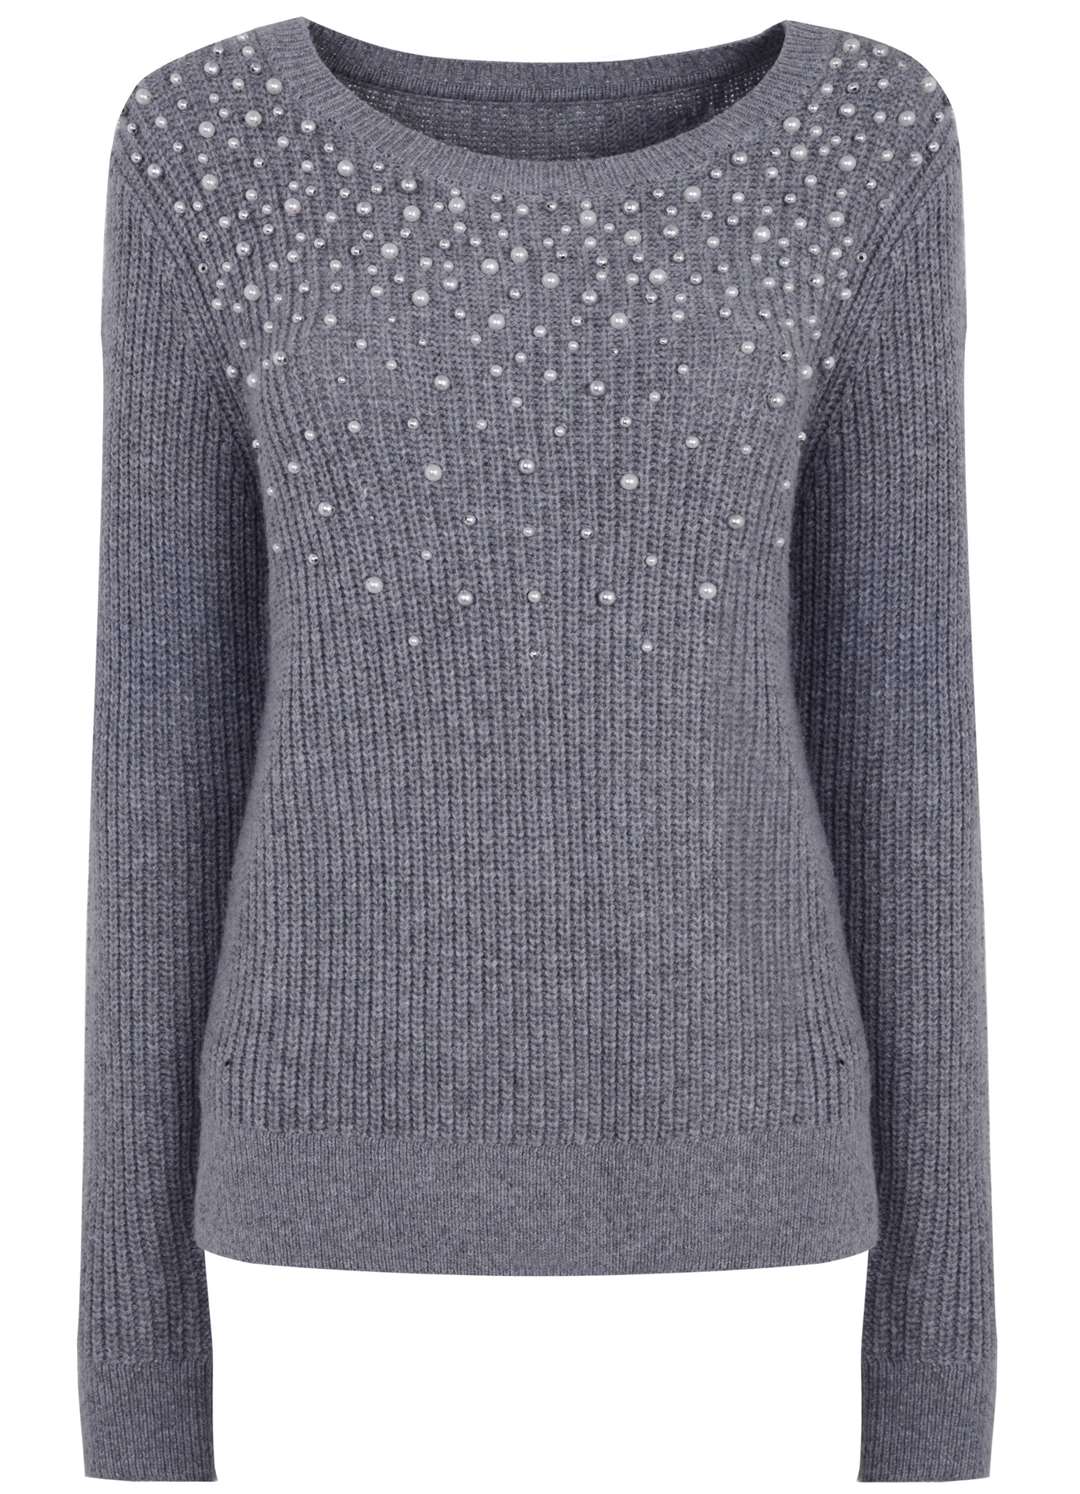 Nine by Savannah Miller - Grey Pearl Embellished Knitted Jumper, £48, available from Debenhams